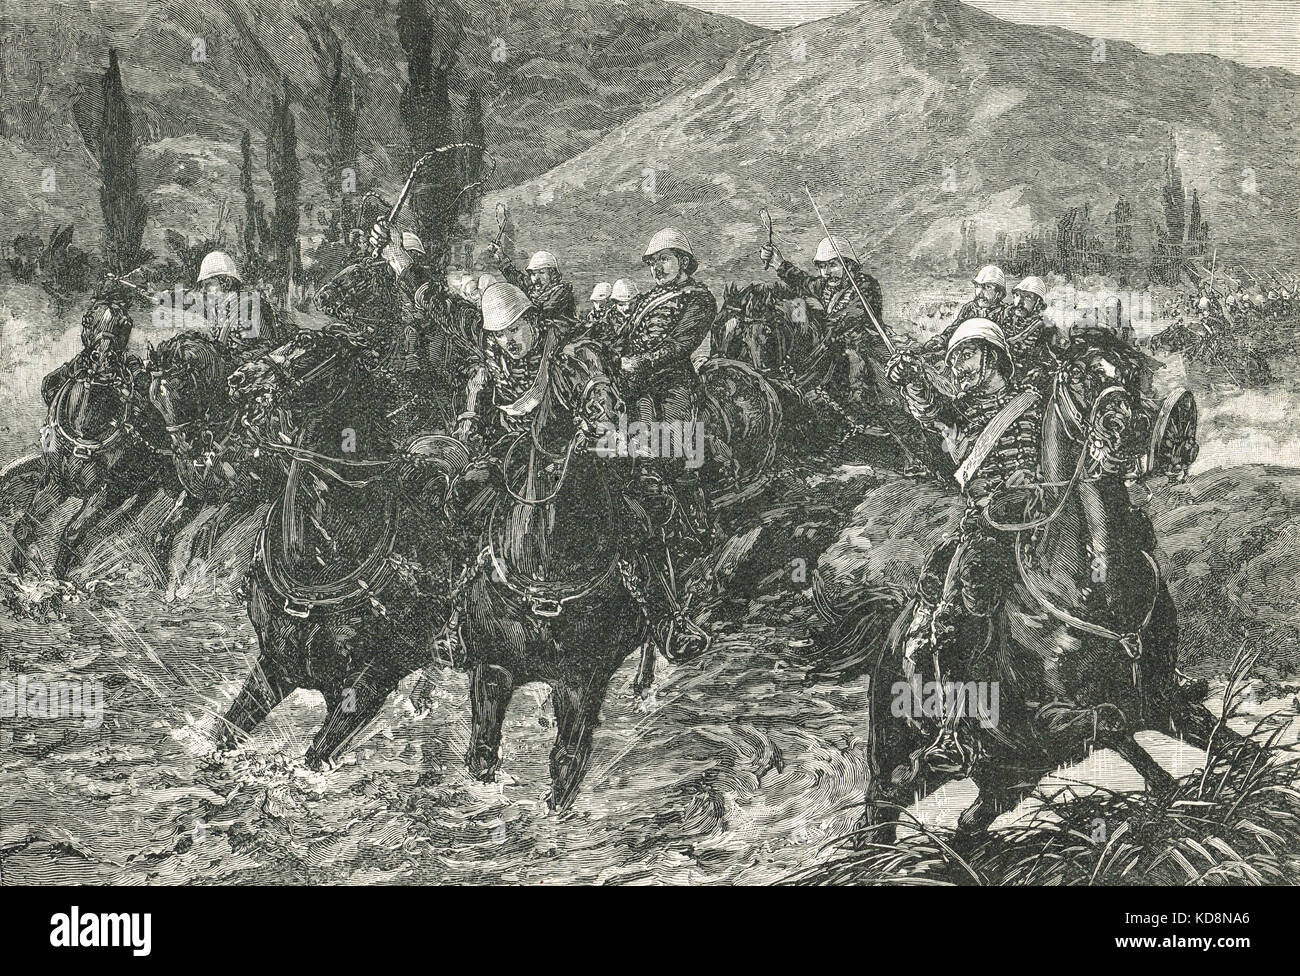 Royal Horse Artillery in action in the Chardeh Valley, trying to save the guns at Battle of Kabul December 1879 in the Second Afghan War Stock Photo